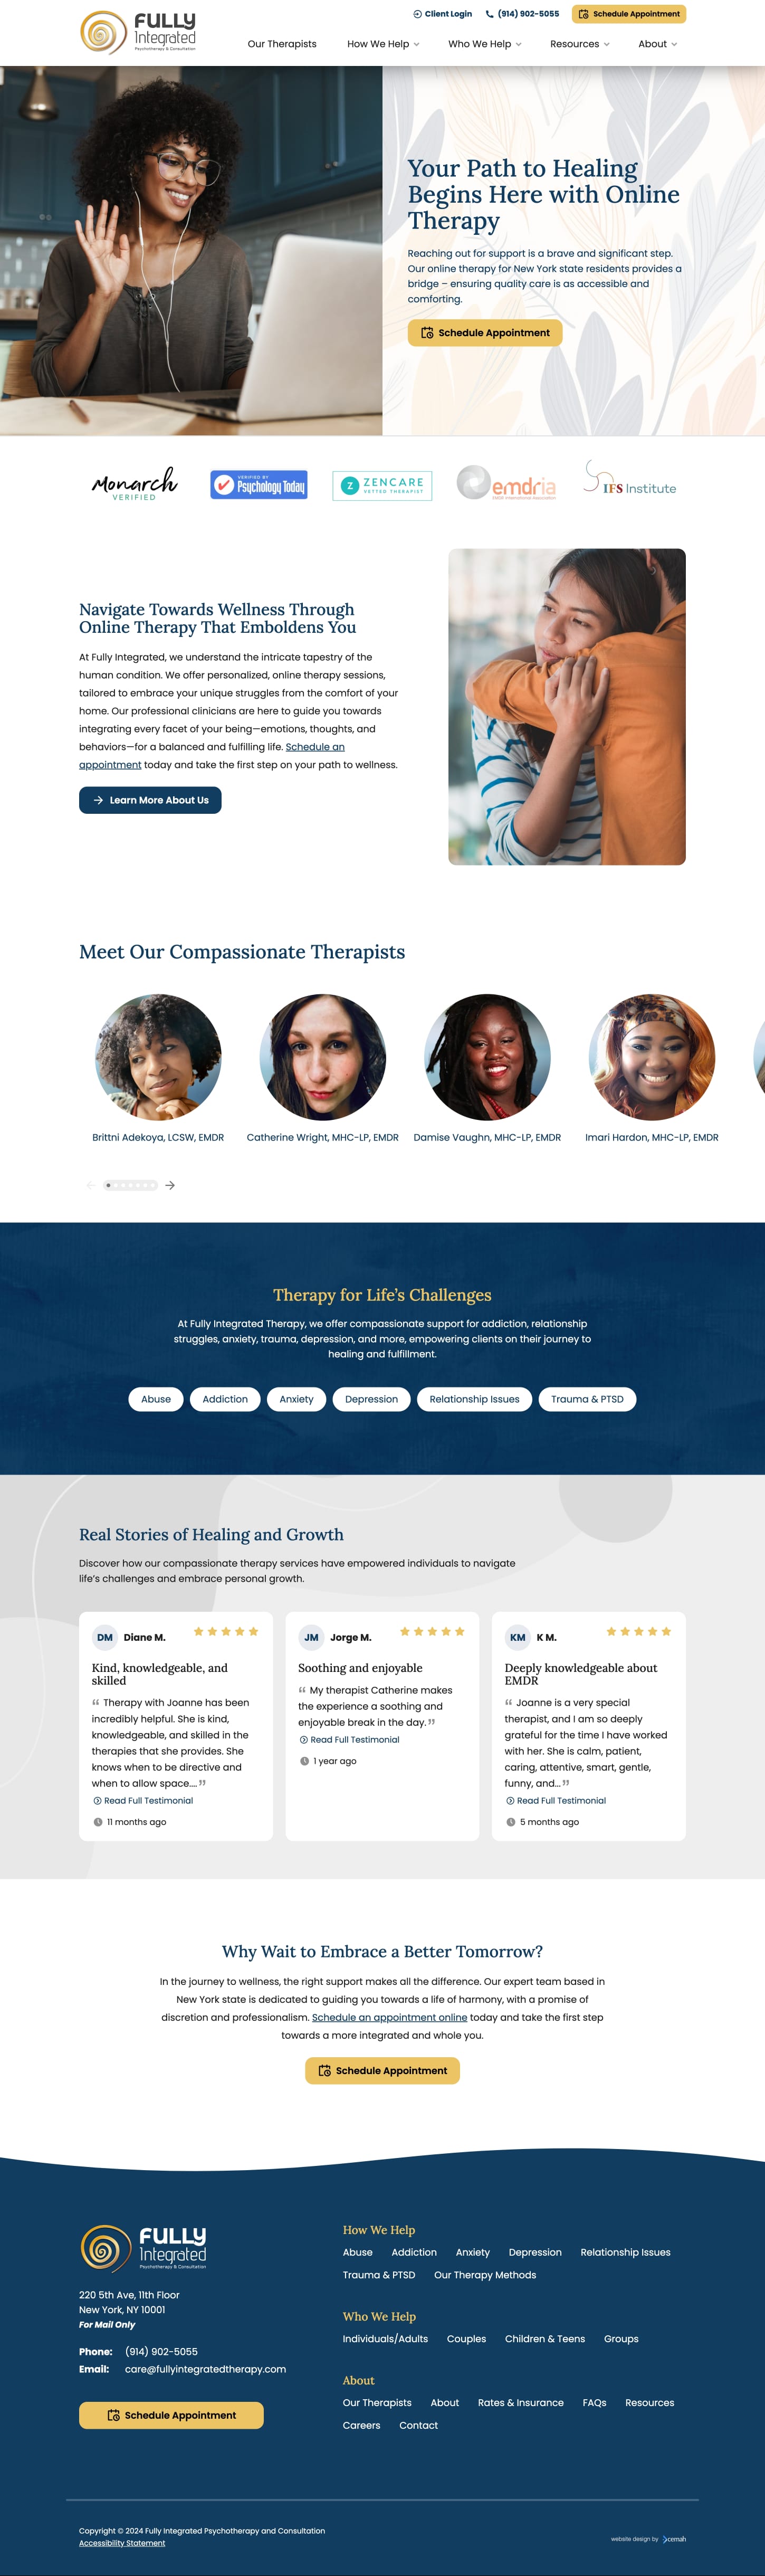 desktop screenshot of Fully Integrated Therapy's website homepage